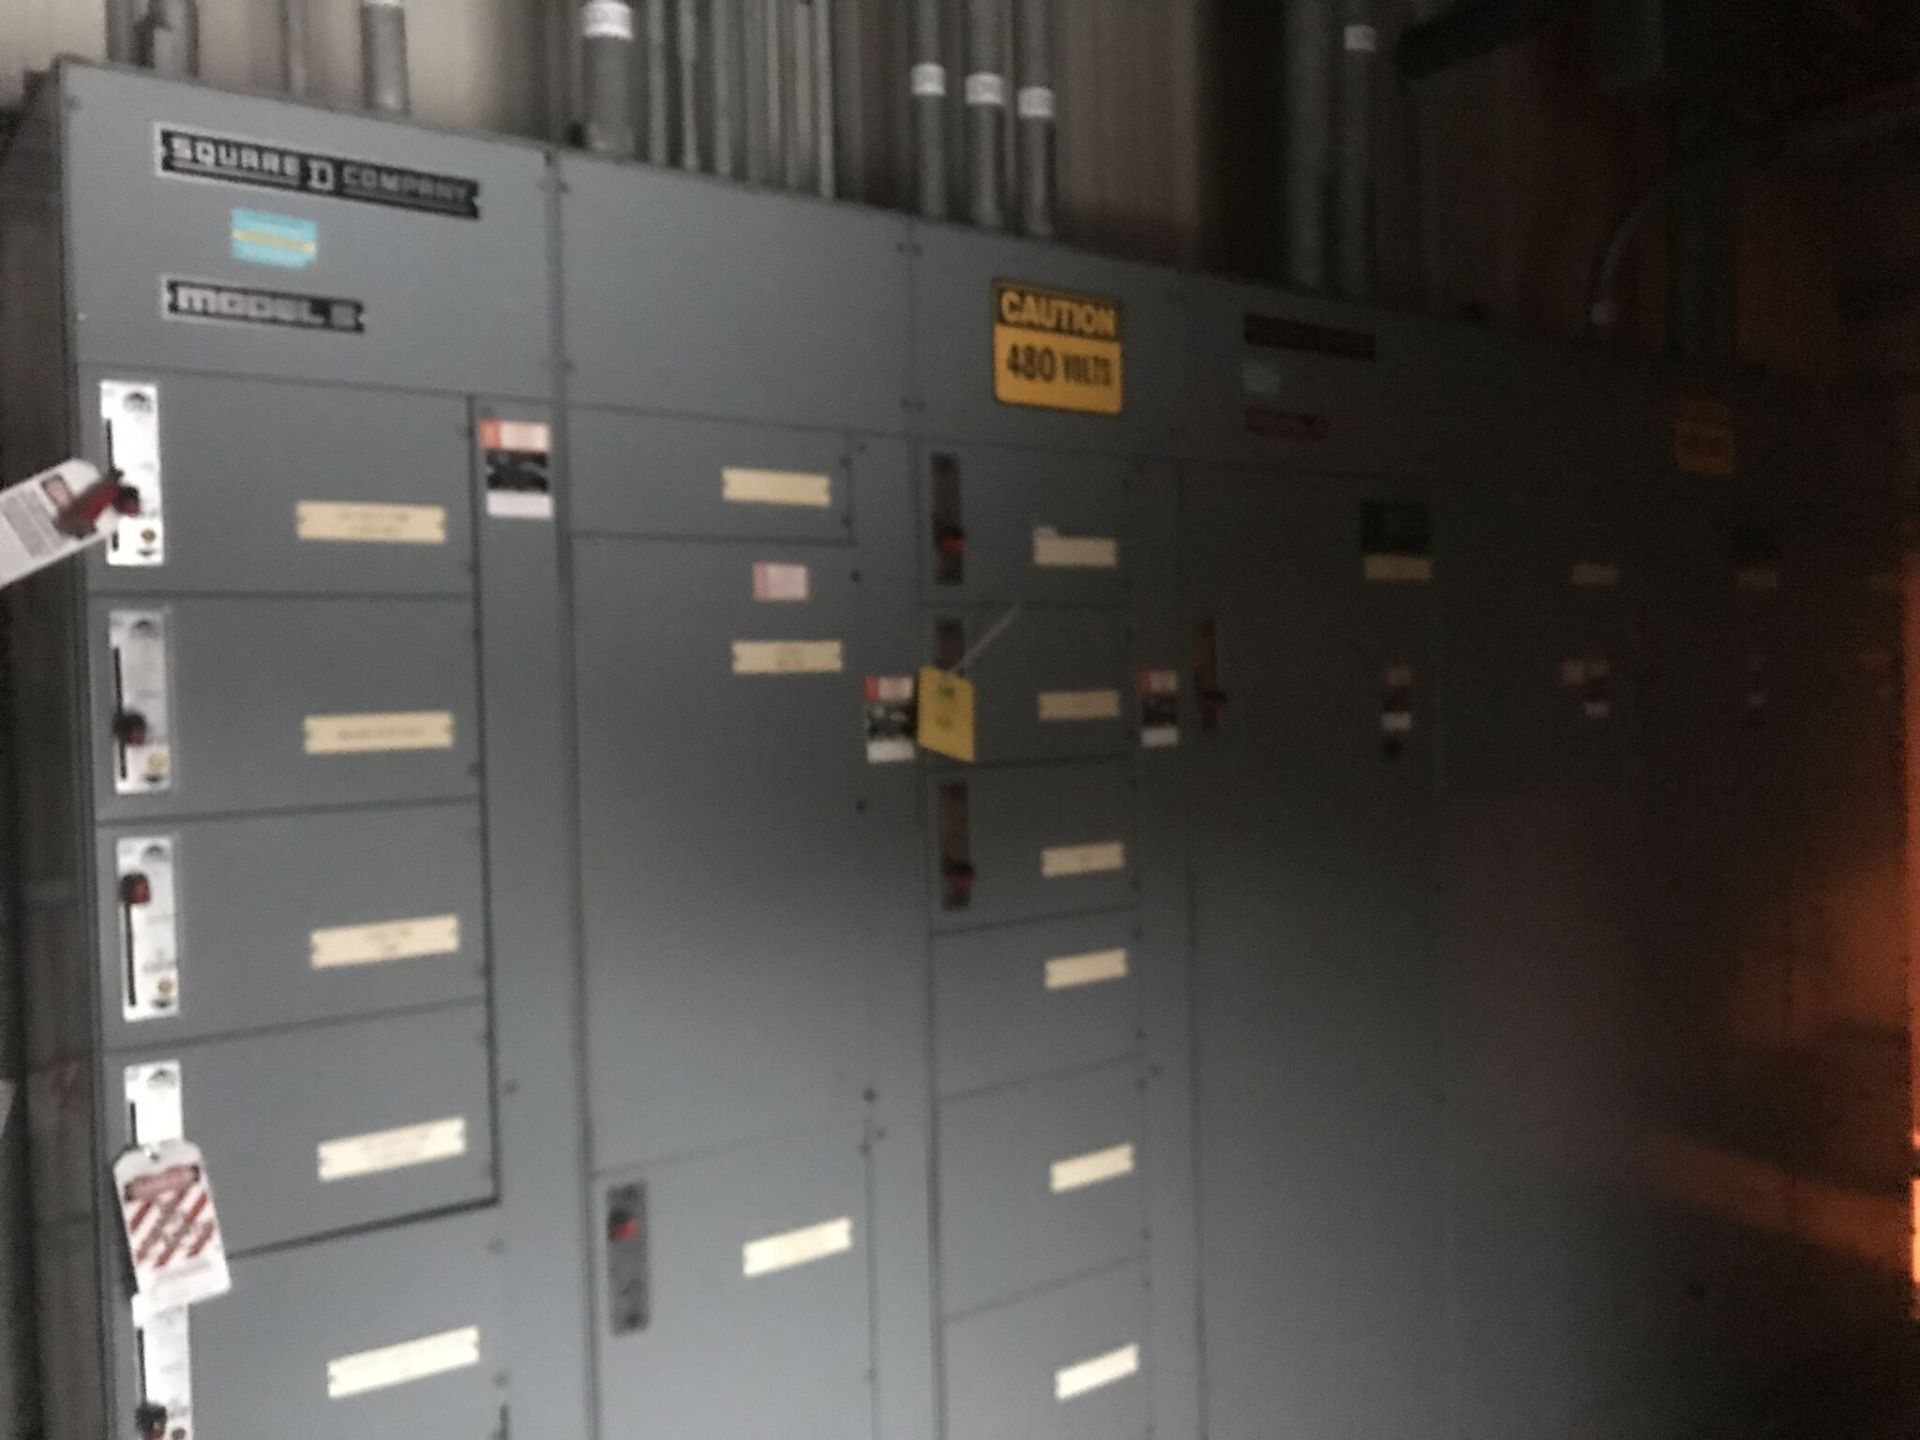 MCC Panel for Cooling Towers, 480 Volts All Breakers